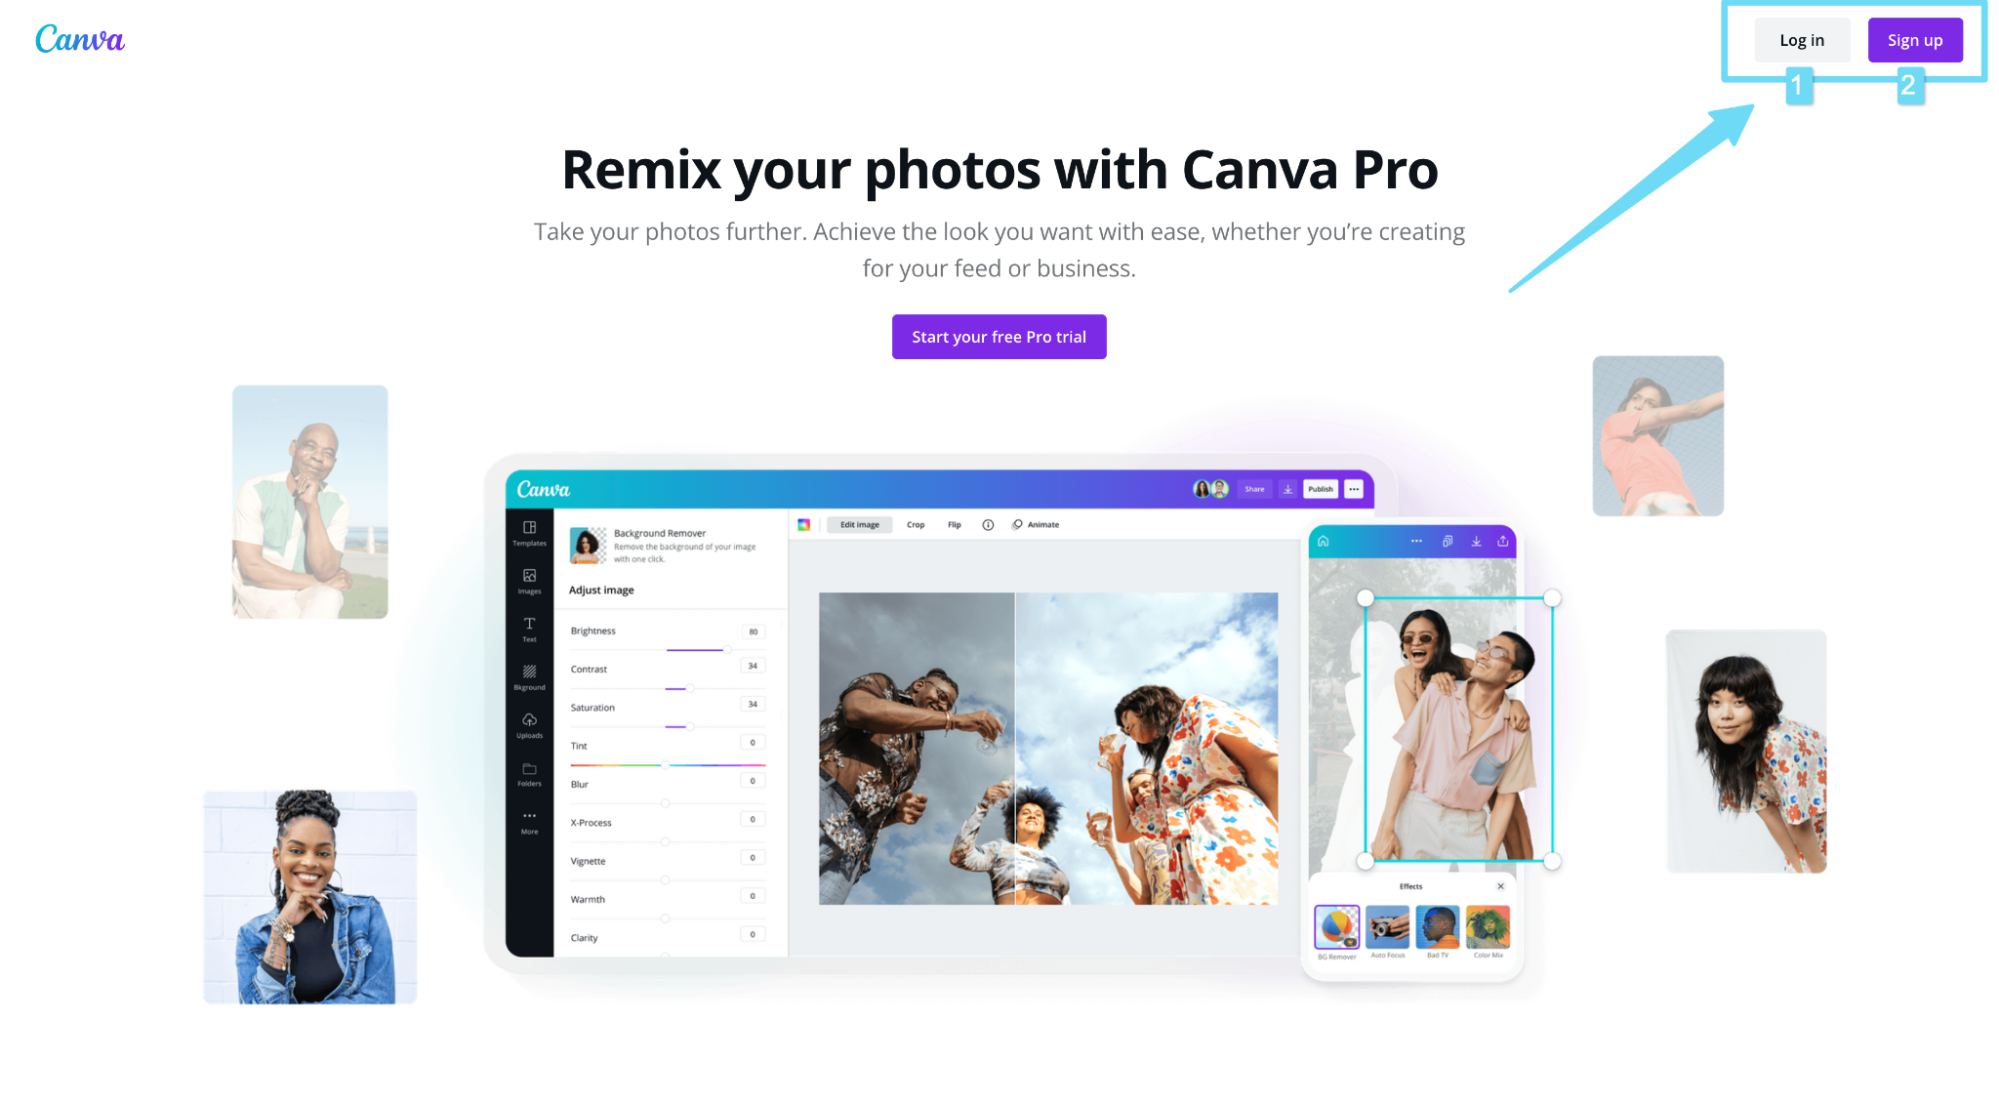 Canva login and free trial